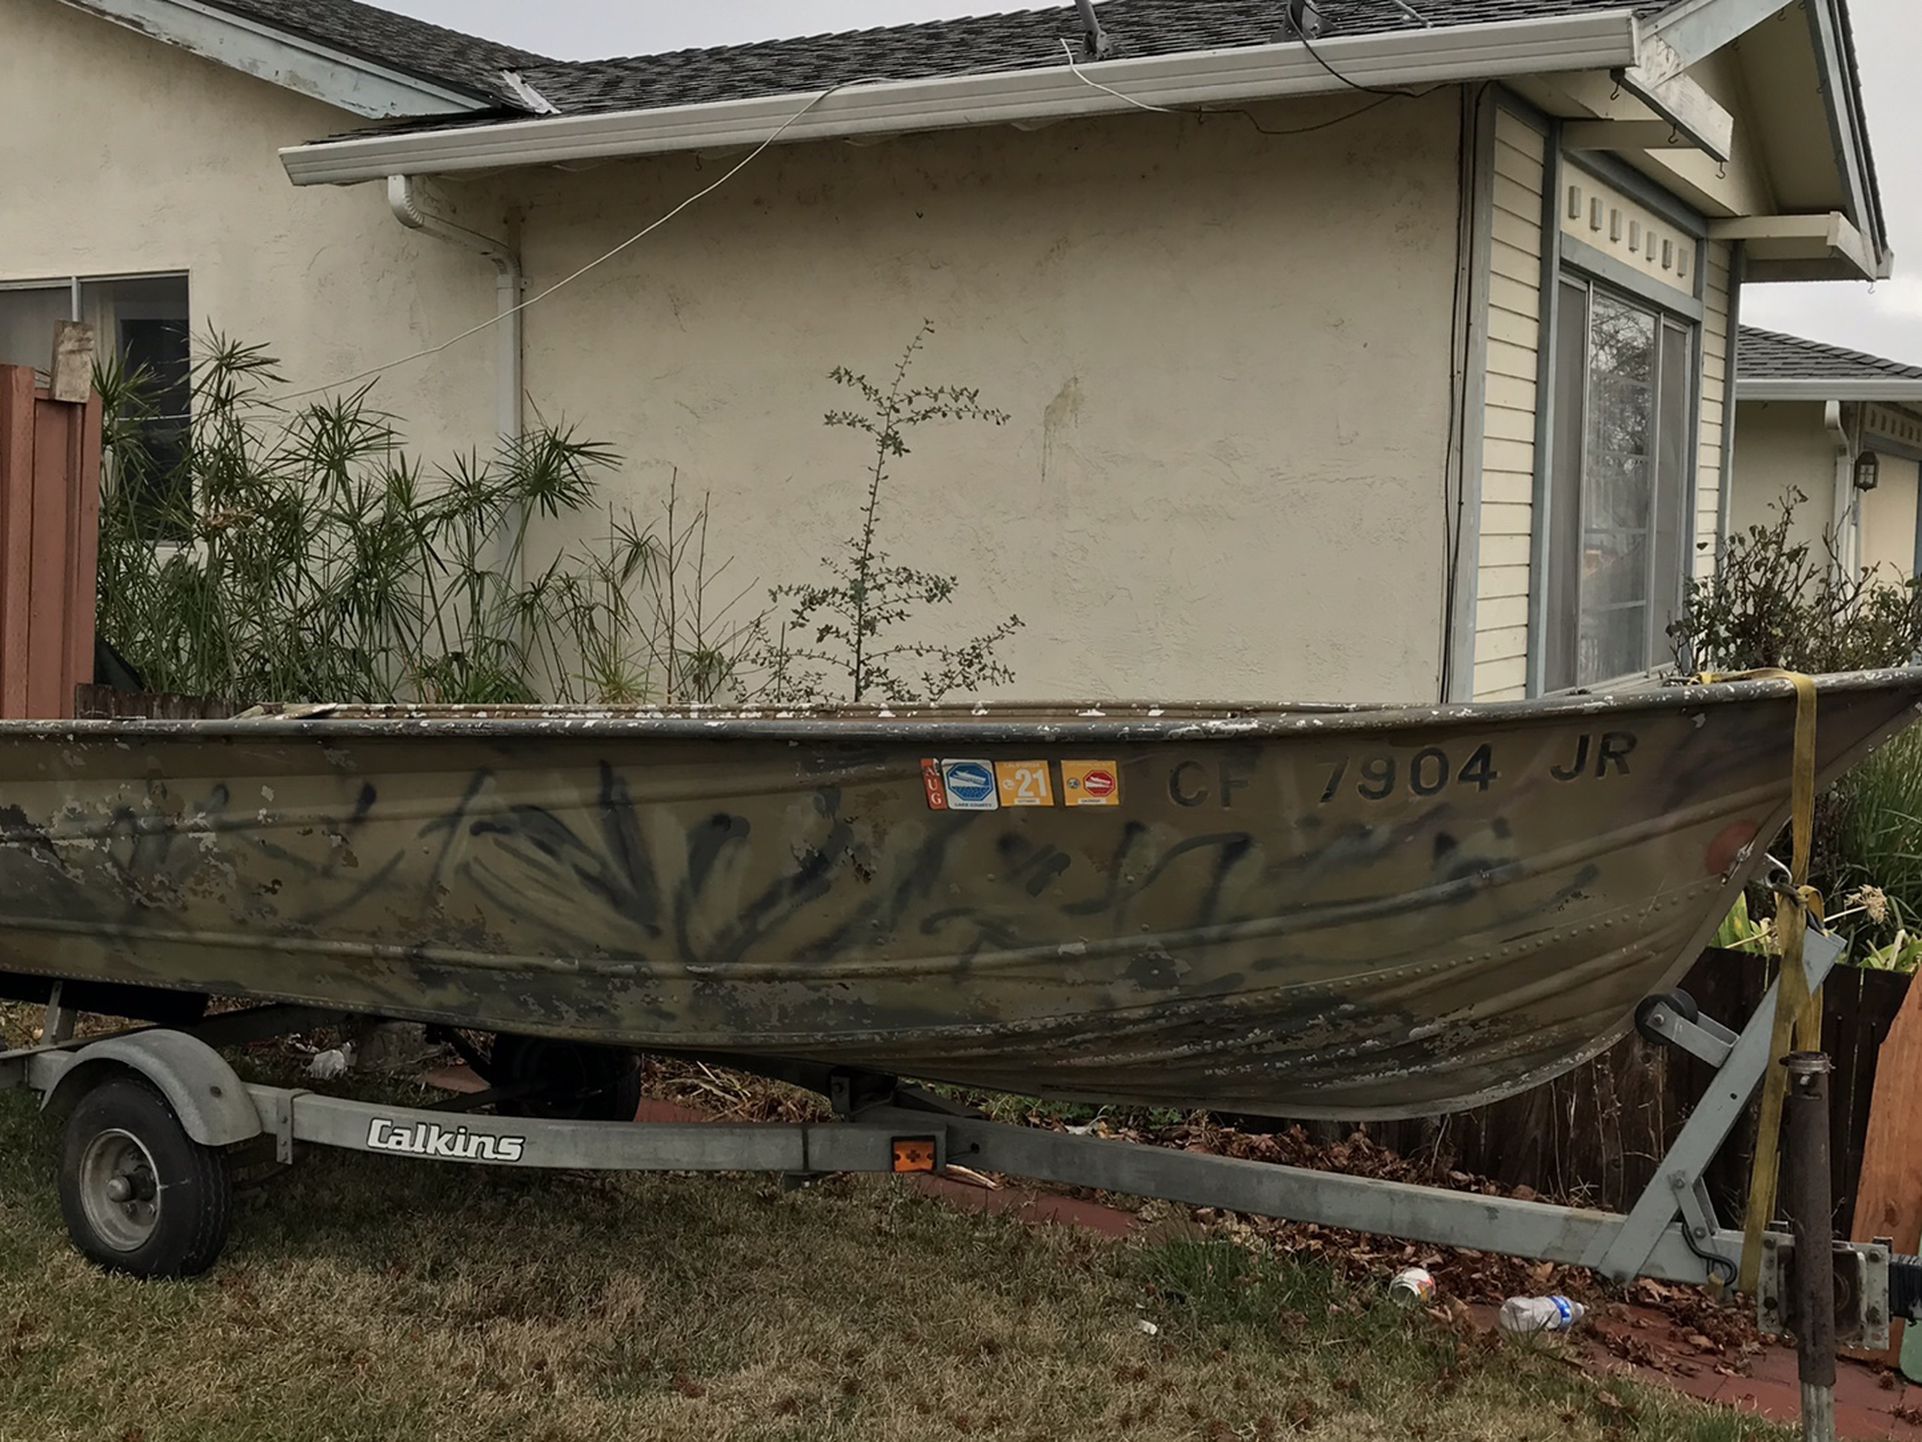 14 Ft Aluminum Boat With Trailer $1200